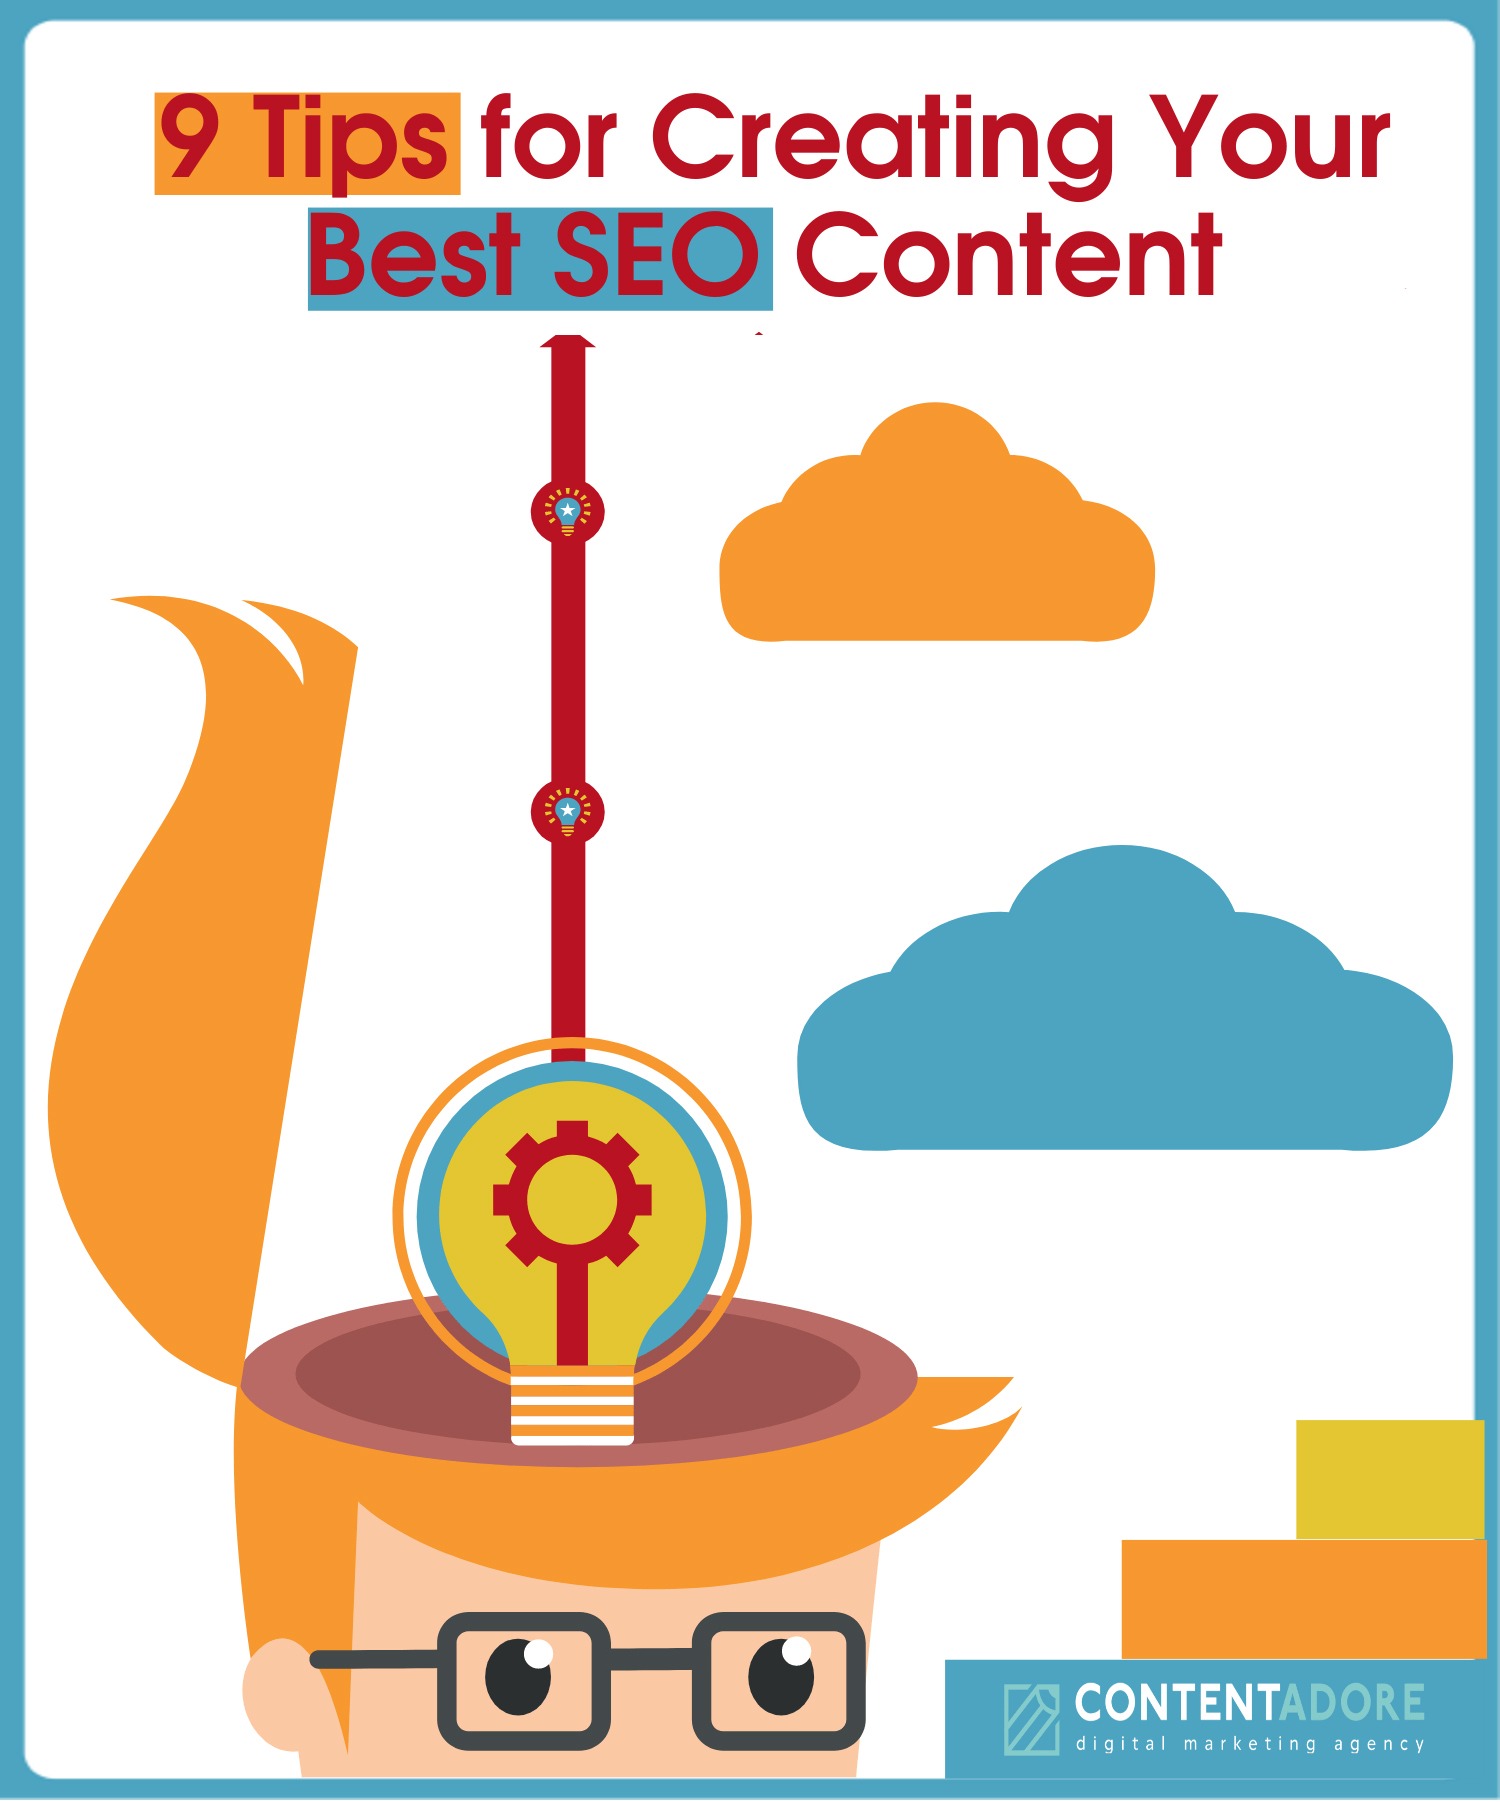 9 Tips for Creating Your Best SEO Content